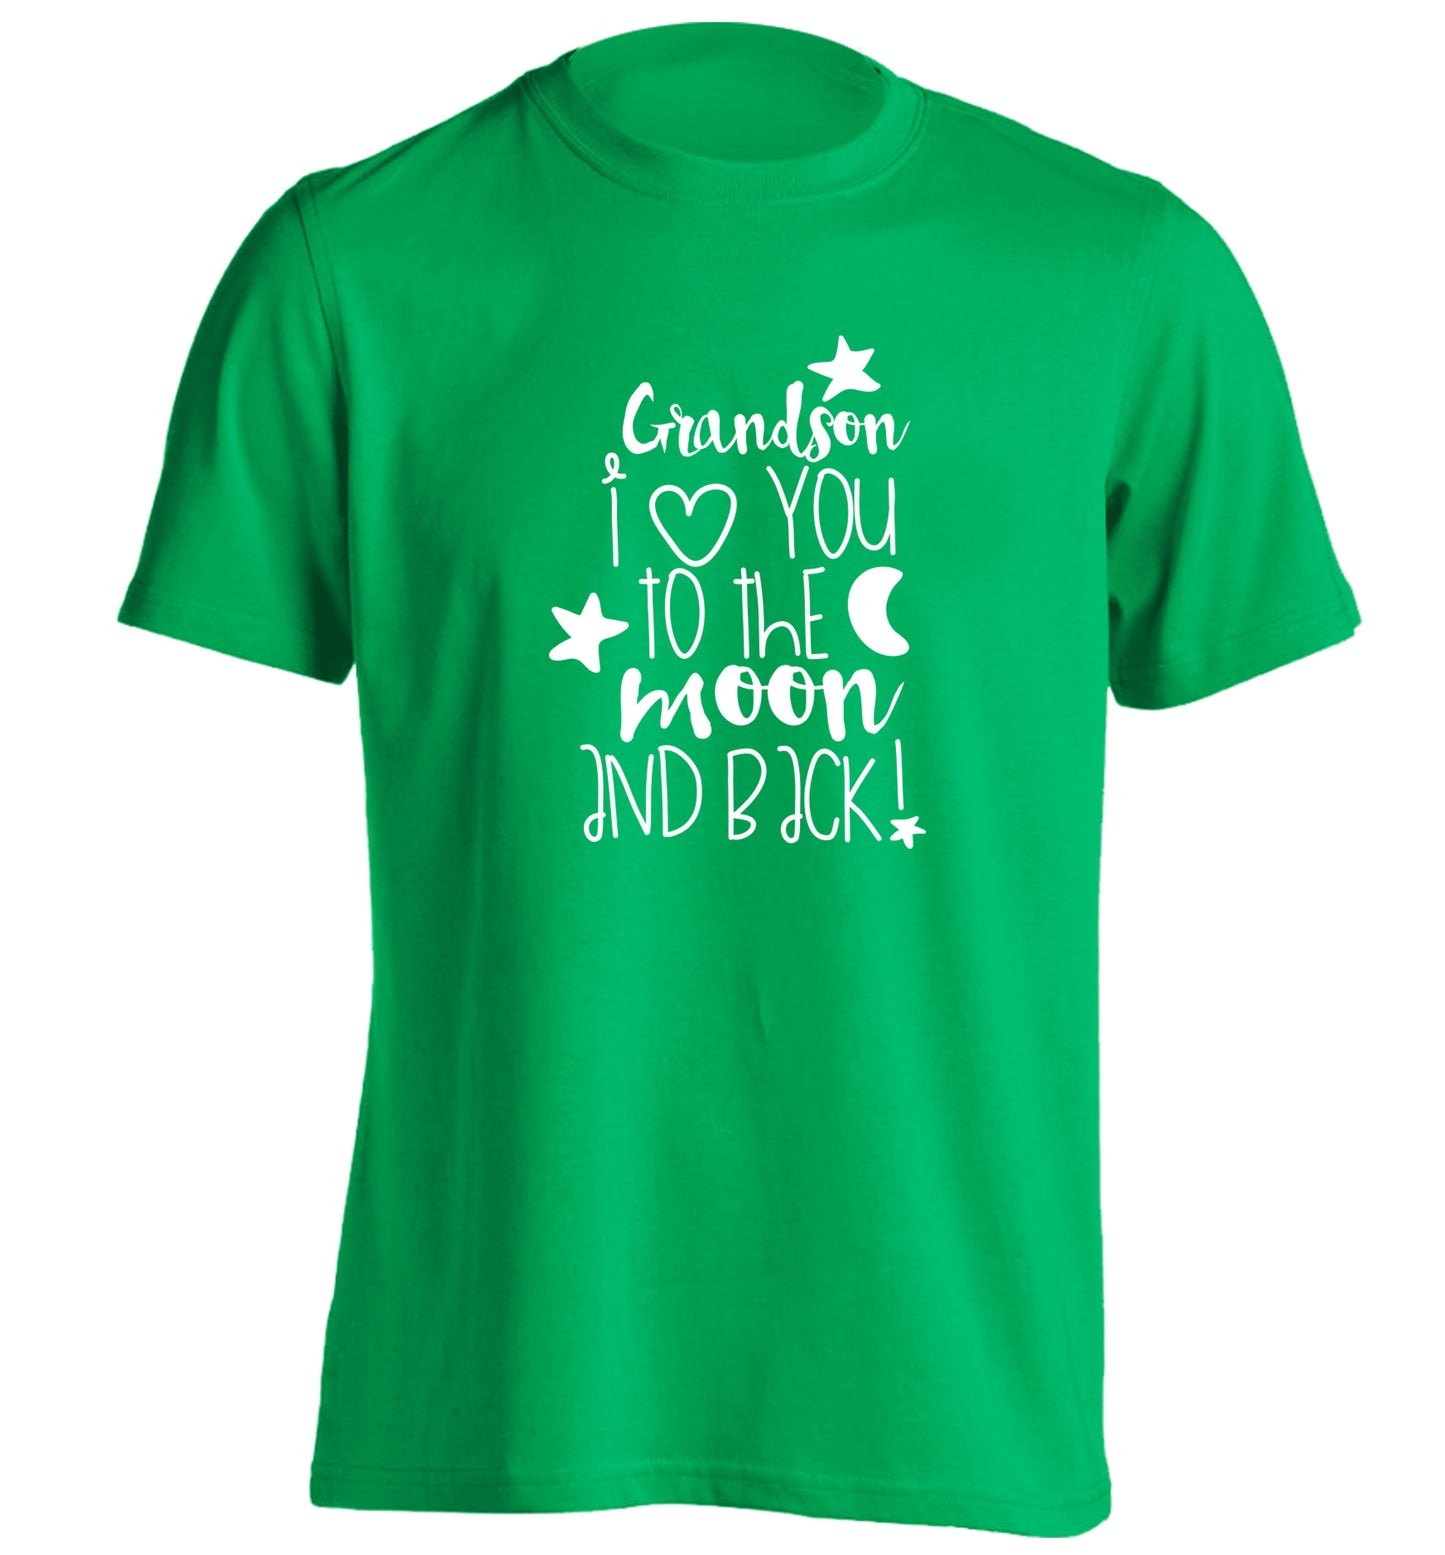 Grandson I love you to the moon and back adults unisex green Tshirt 2XL